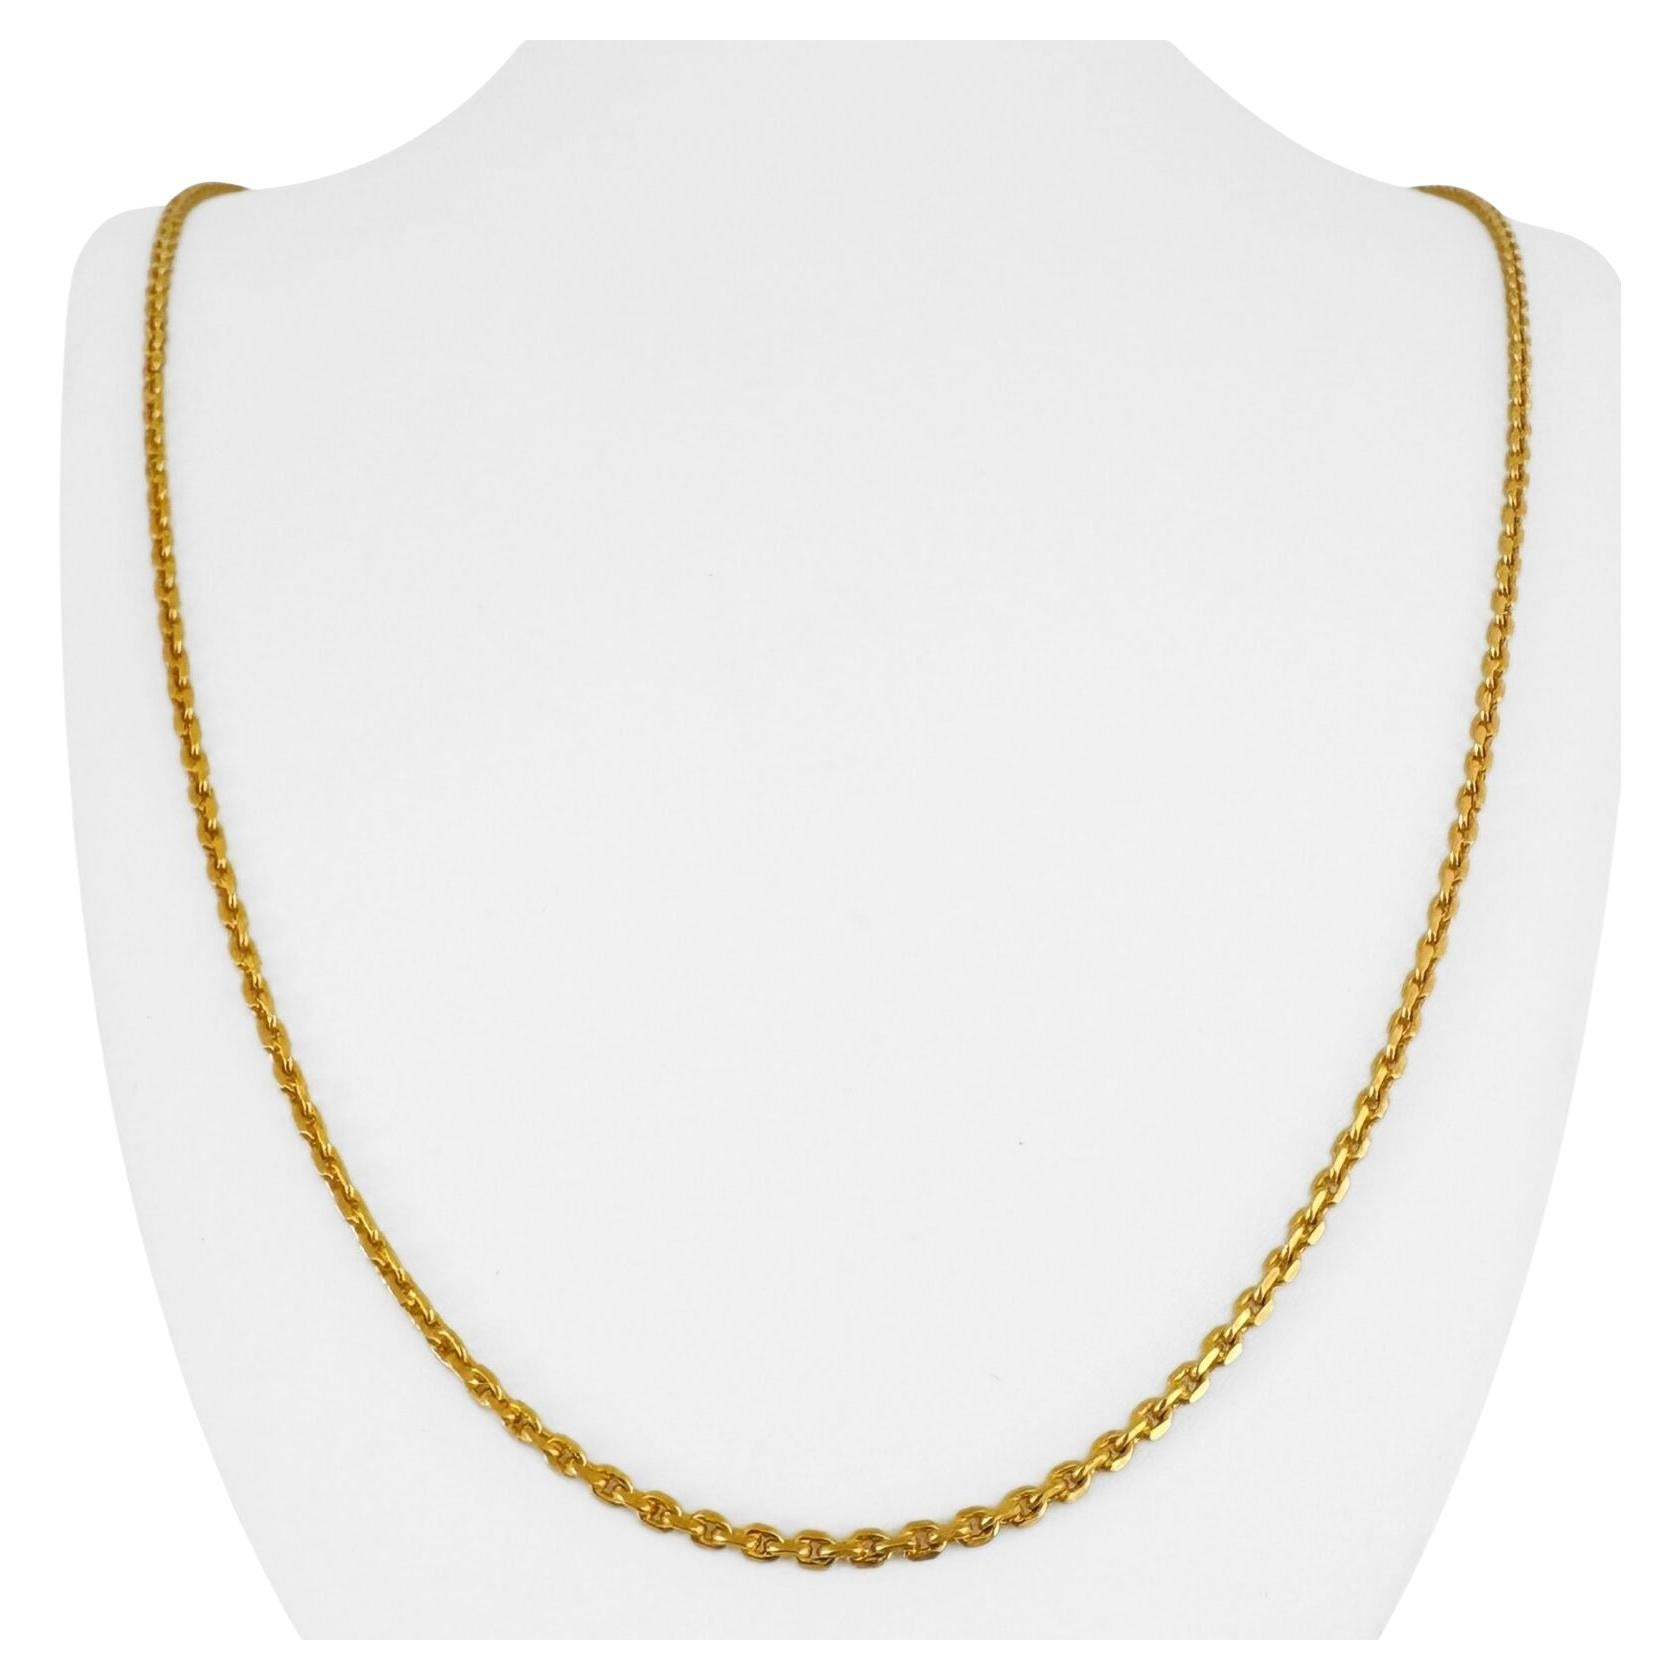 24 Karat Pure Yellow Gold Solid Long Cable Link Chain Necklace 